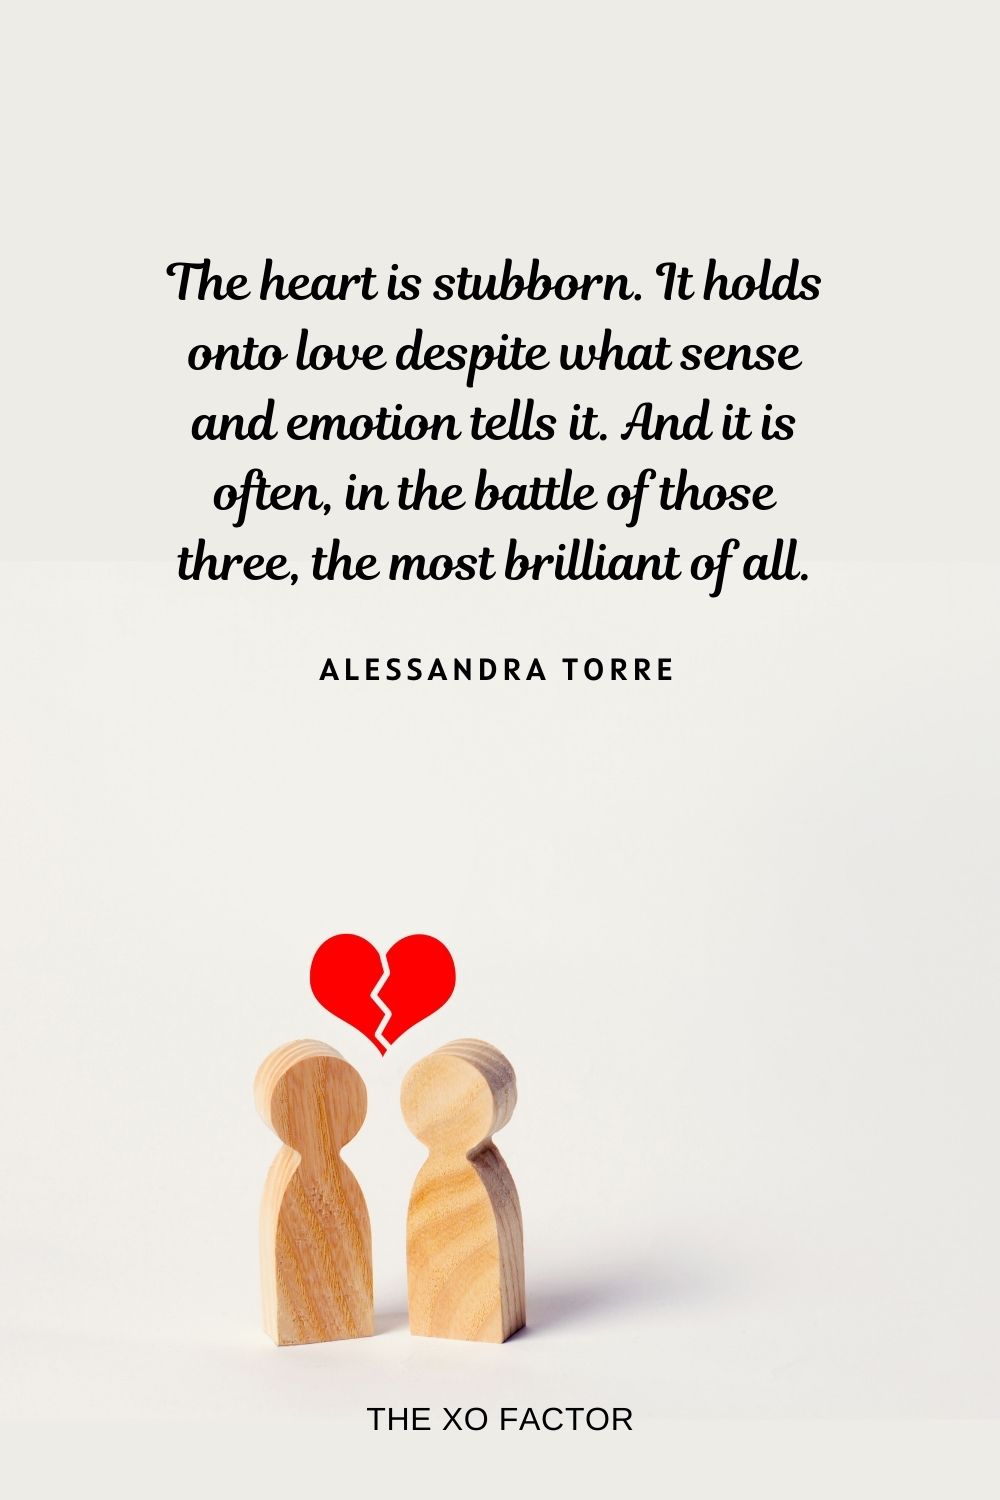 The heart is stubborn. It holds onto love despite what sense and emotion tells it. And it is often, in the battle of those three, the most brilliant of all. Alessandra Torre